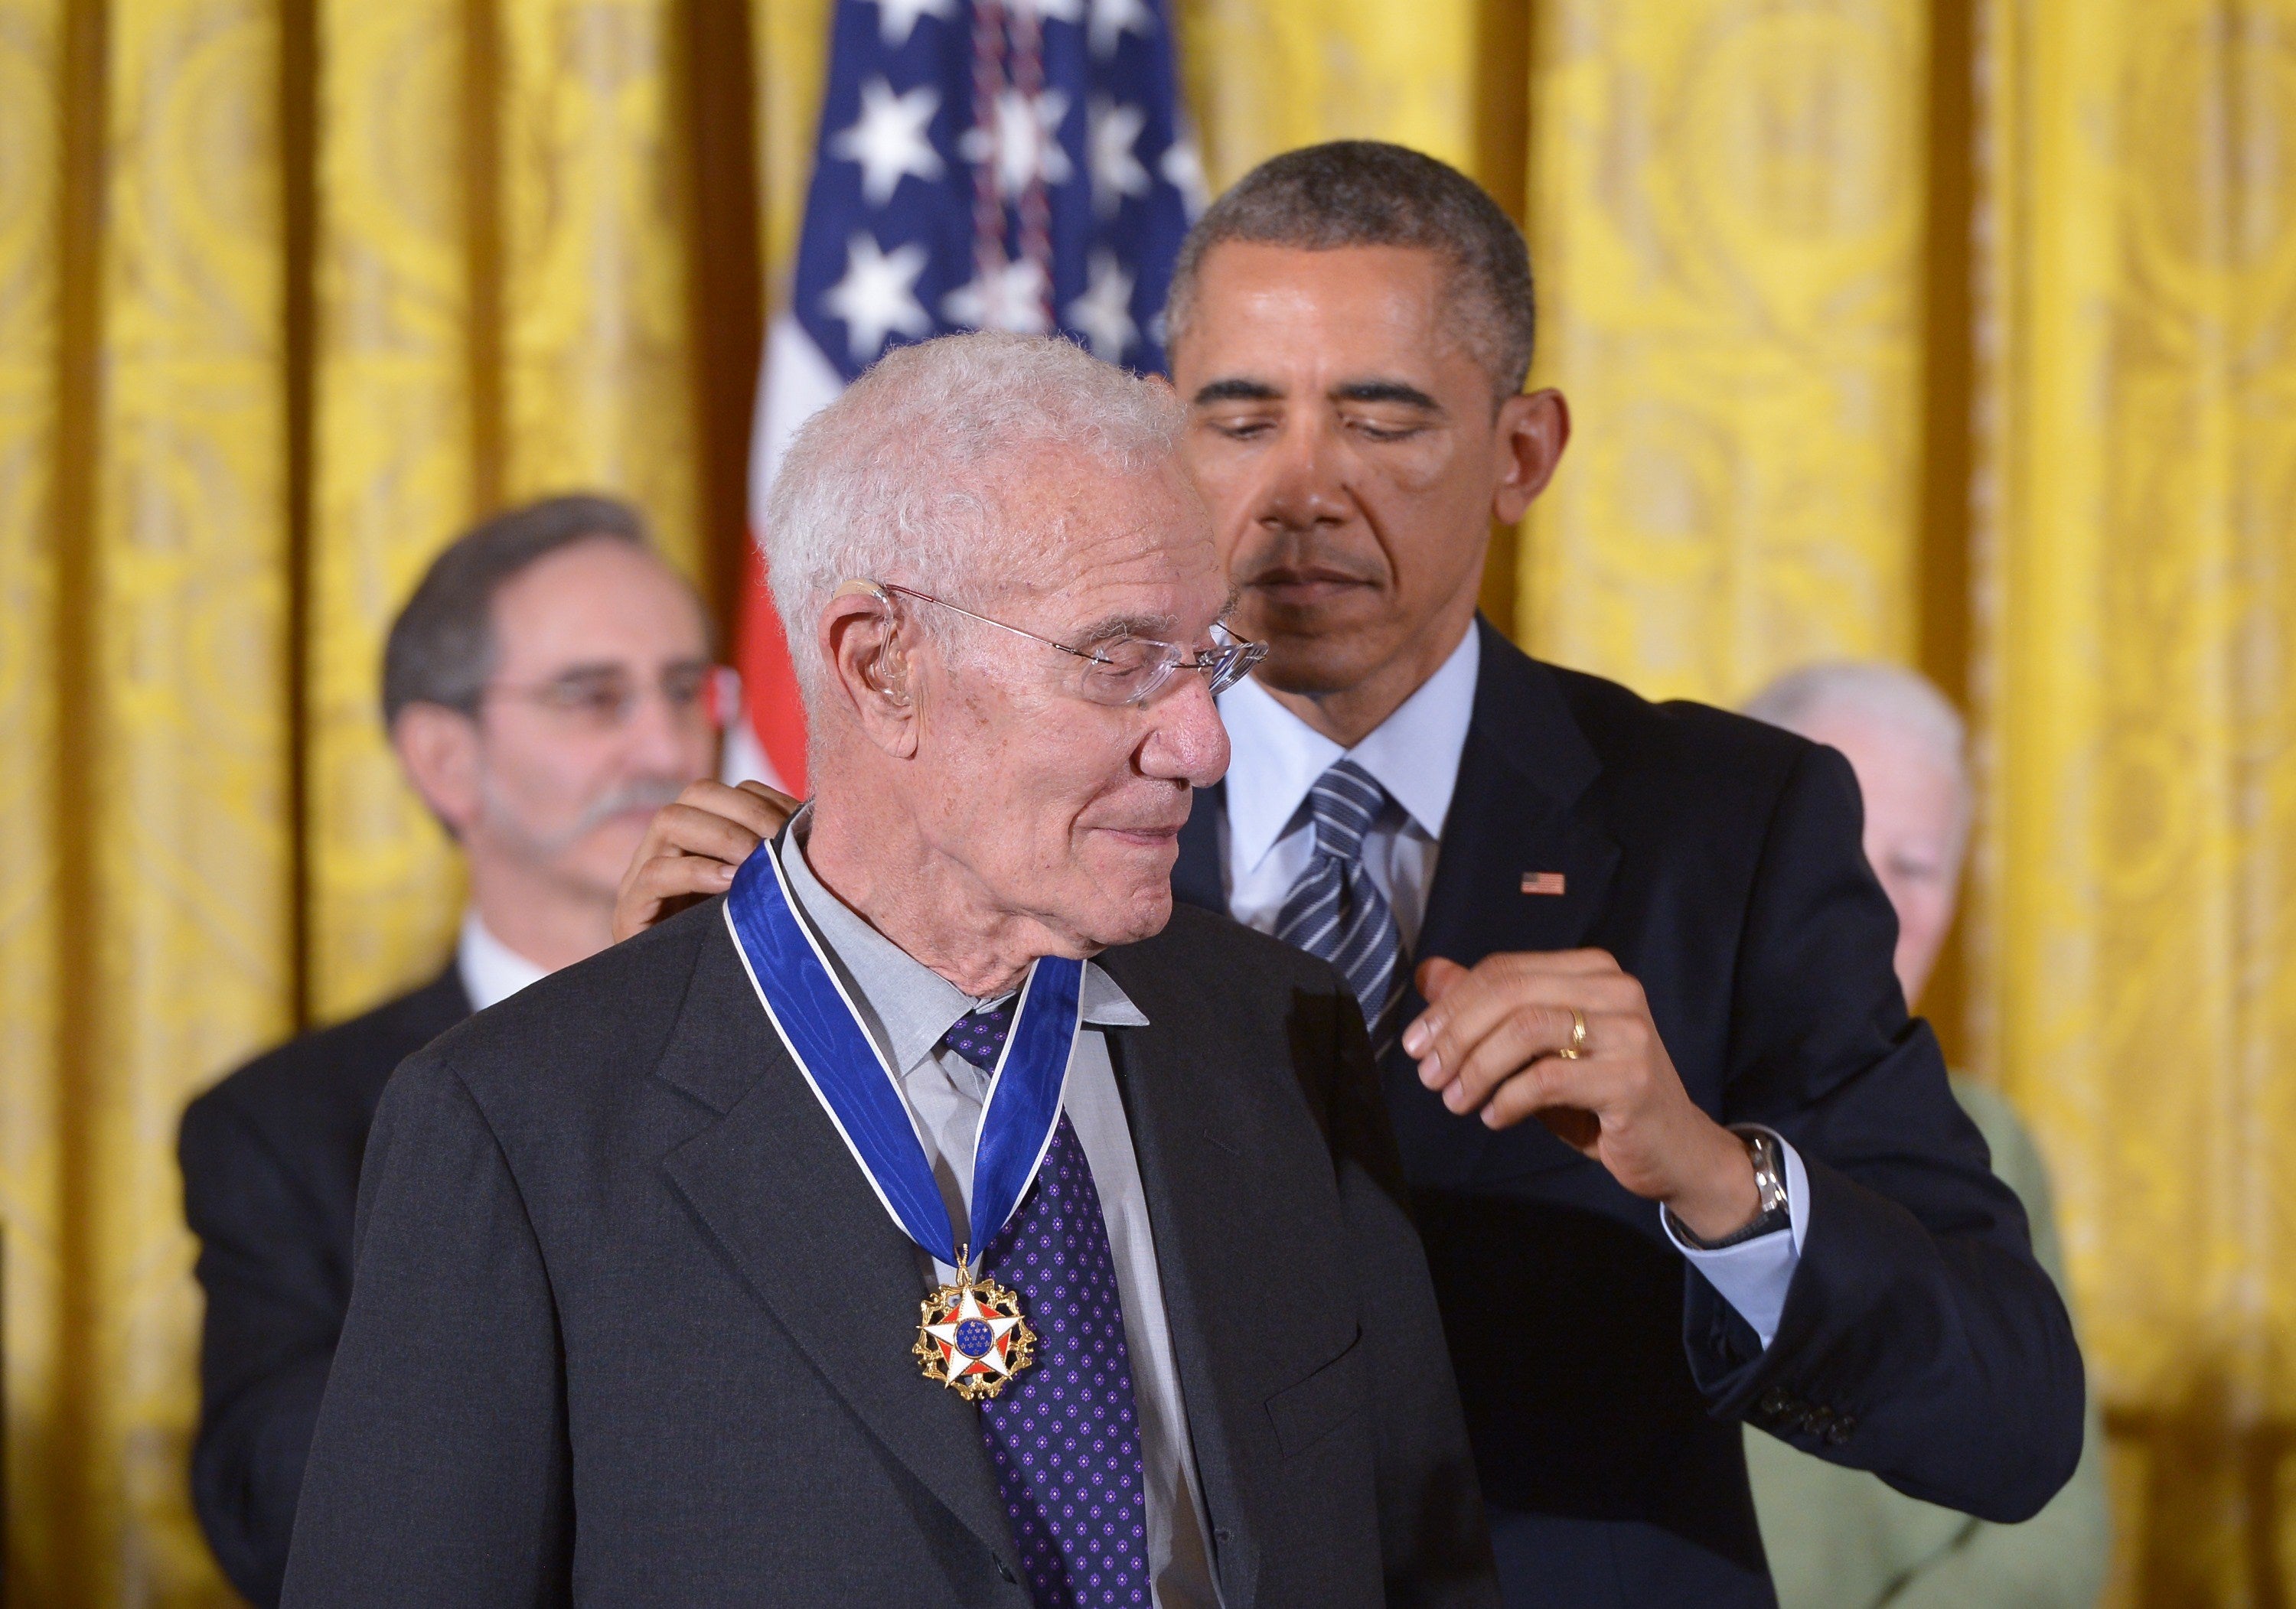 US President Barack Obama presents the Medal of Freedom to economist Robert Solow during a ceremony in the East Room of the White House on November 24, 2014 in Washington, DC